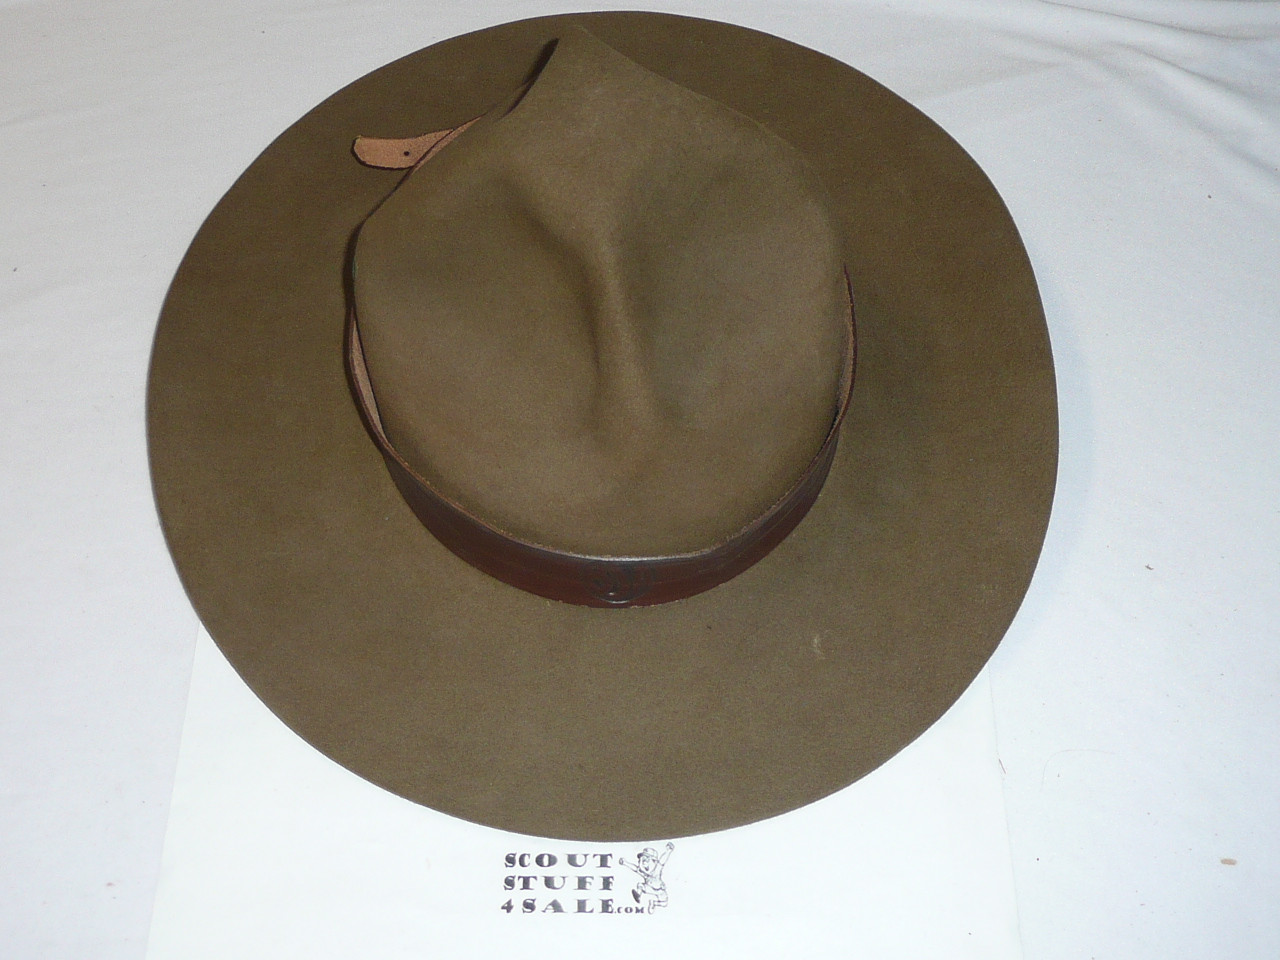 Official Boy Scout Scout MasterCampaign Hat (Smokey the Bear hat), has  storage board, Like new but internal leather band is separating from  stiching